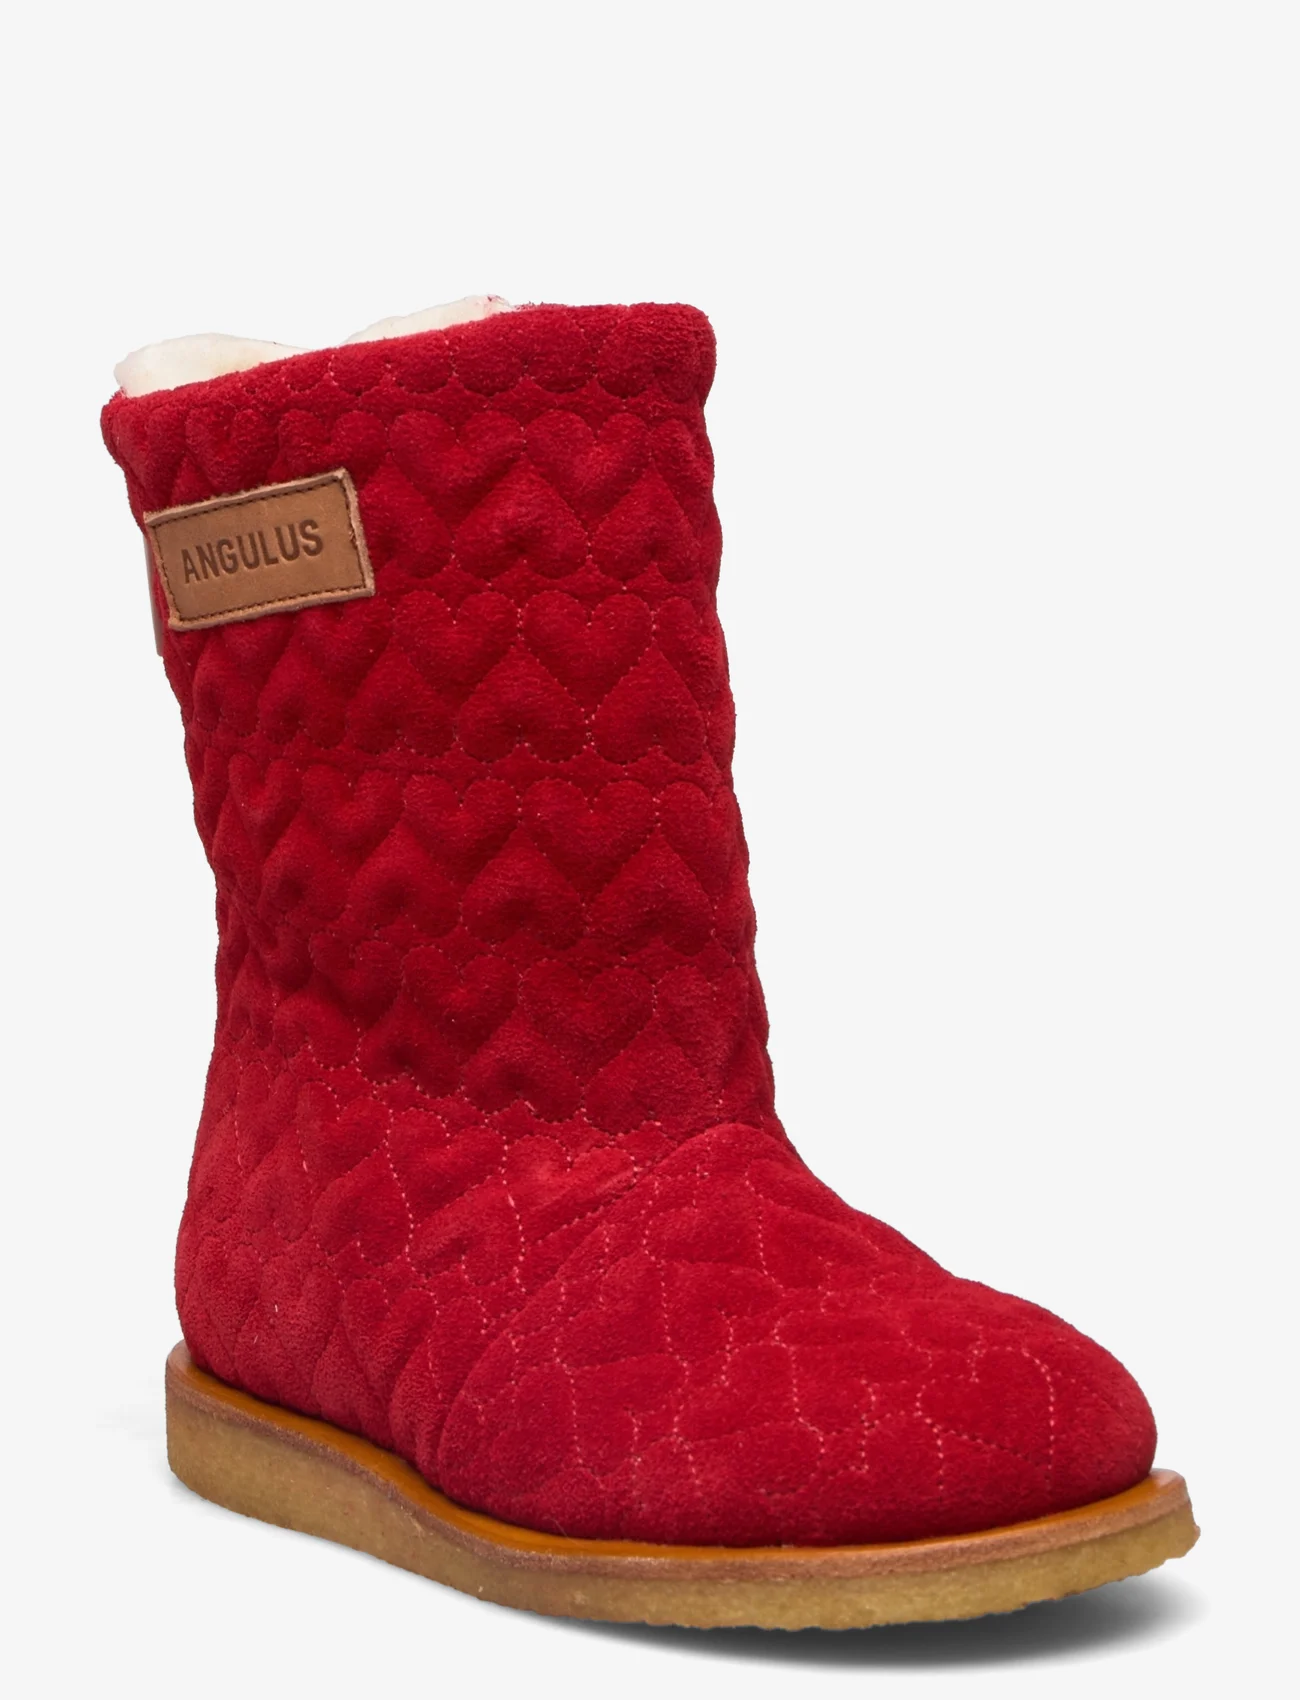 ANGULUS - Boots - flat - with zipper - barn - 1777/1789 red/cognac - 0